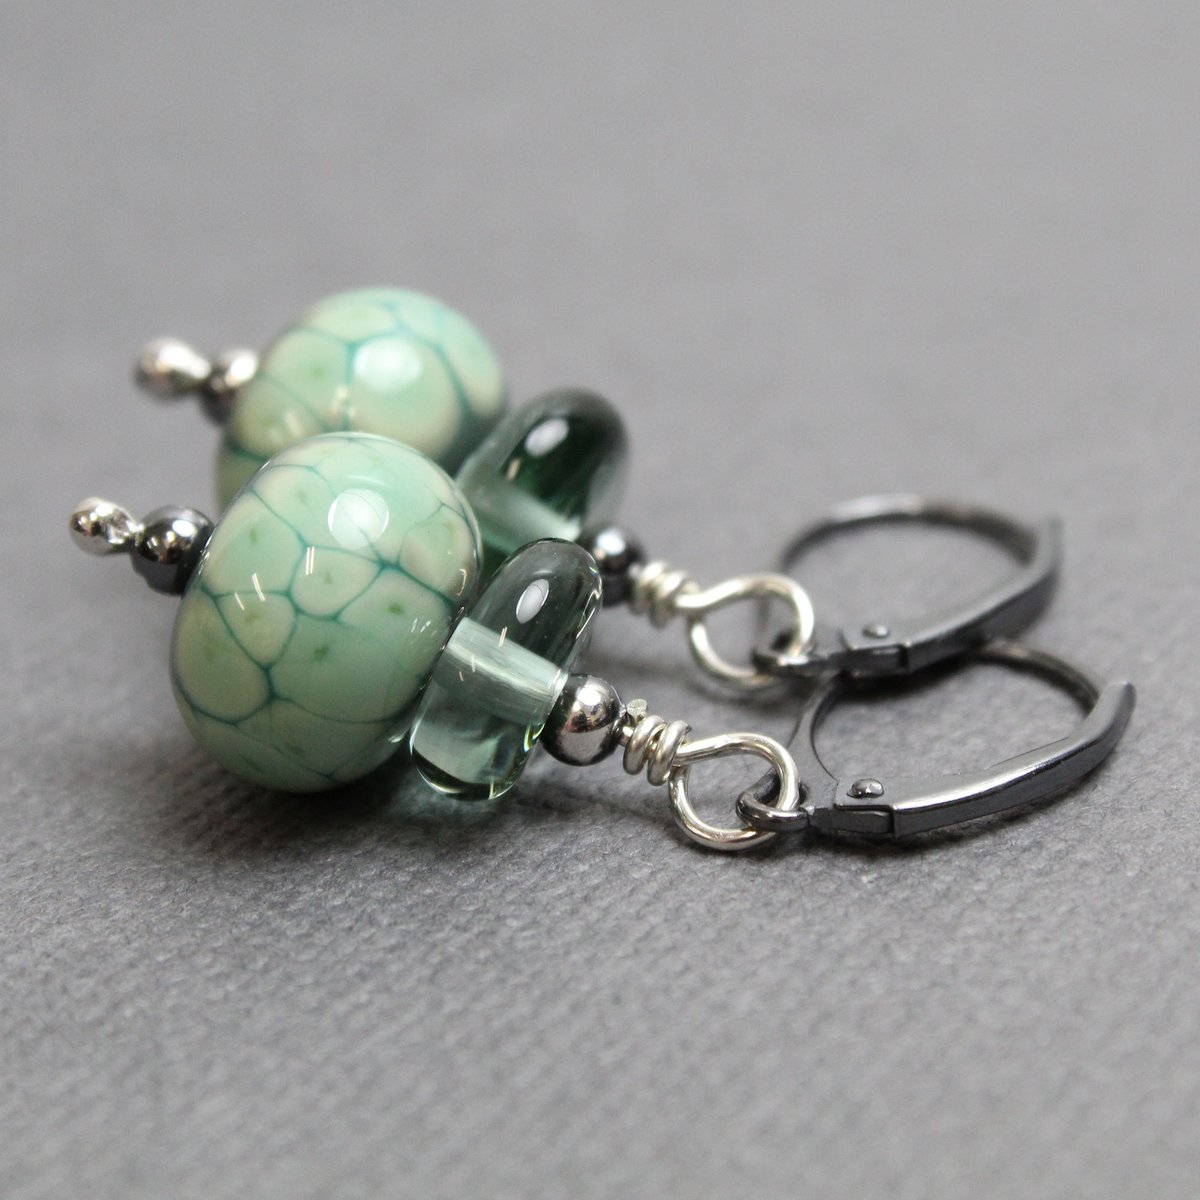 Turquoise Green Lampwork Bead Dangle Earrings with Sterling Silver Lever Backs ow.ly/nKfz50yE7wg #lampworkearrings #earrings #springfashion #bohofinds #springjewelry